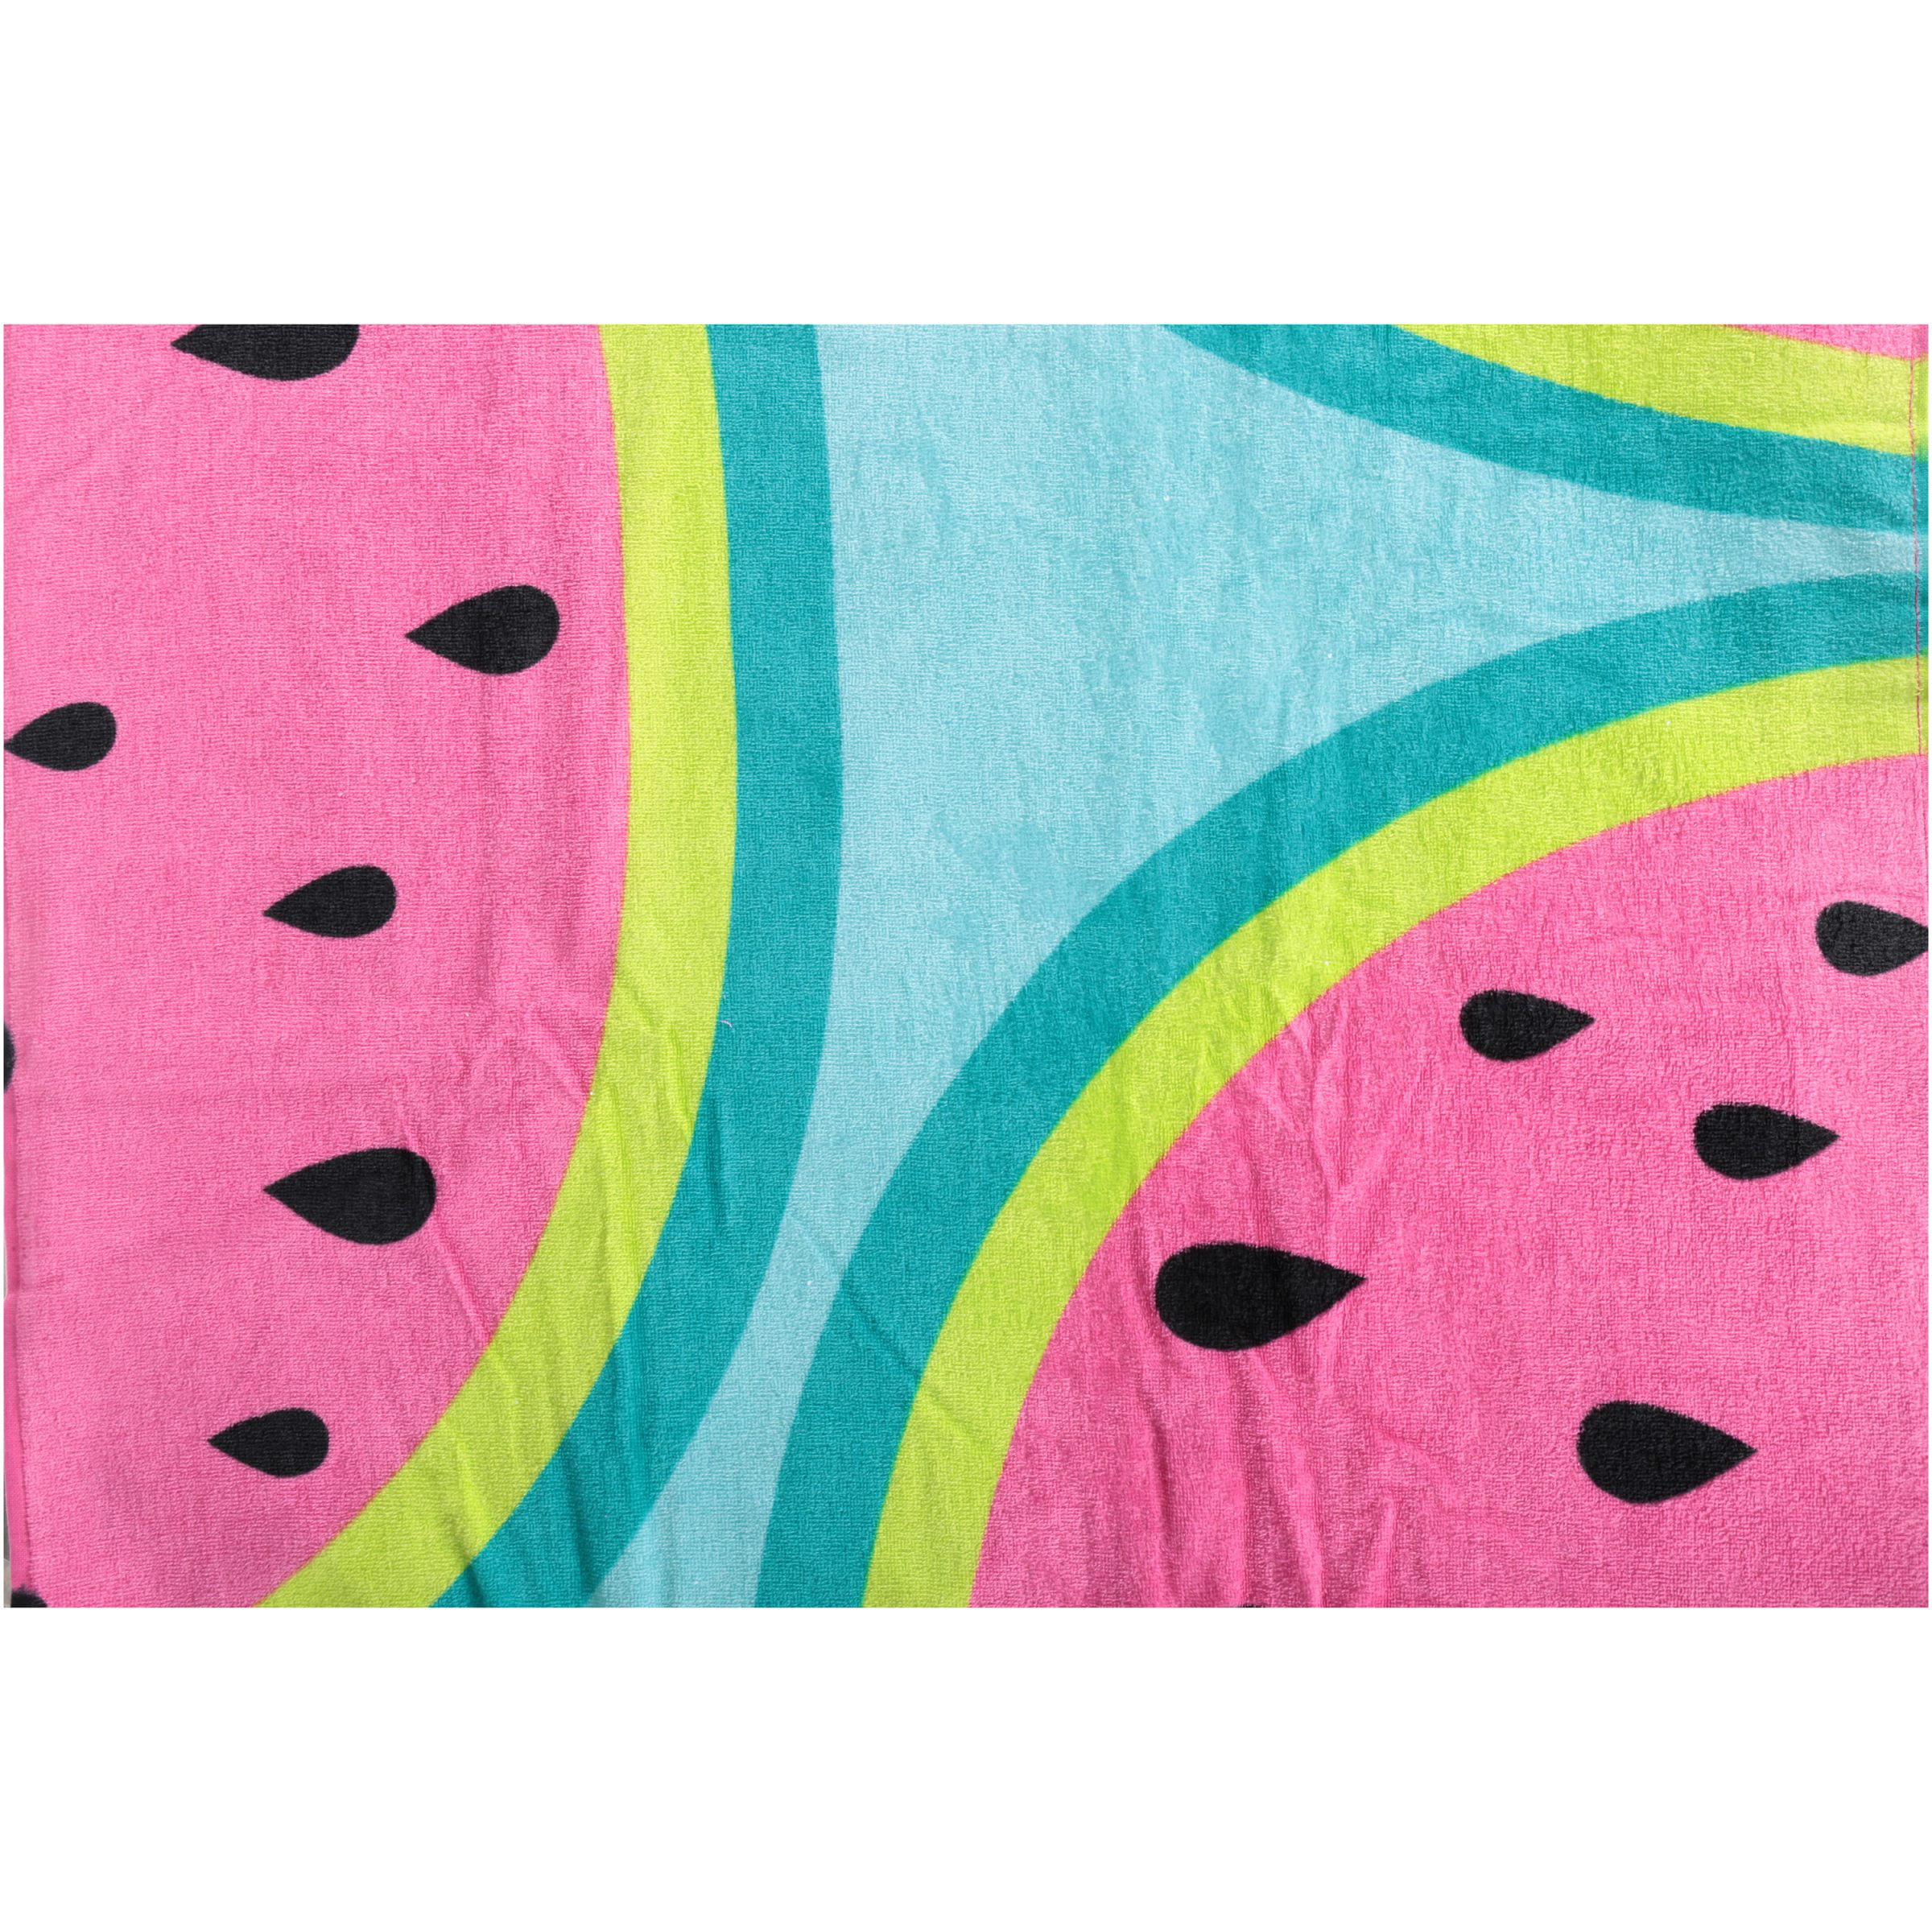 GIGGLE NOVELTY GIFT WATERMELON GIANT BATHROOM BEACH TOWEL BRIGHT RED MICROFIBRE 